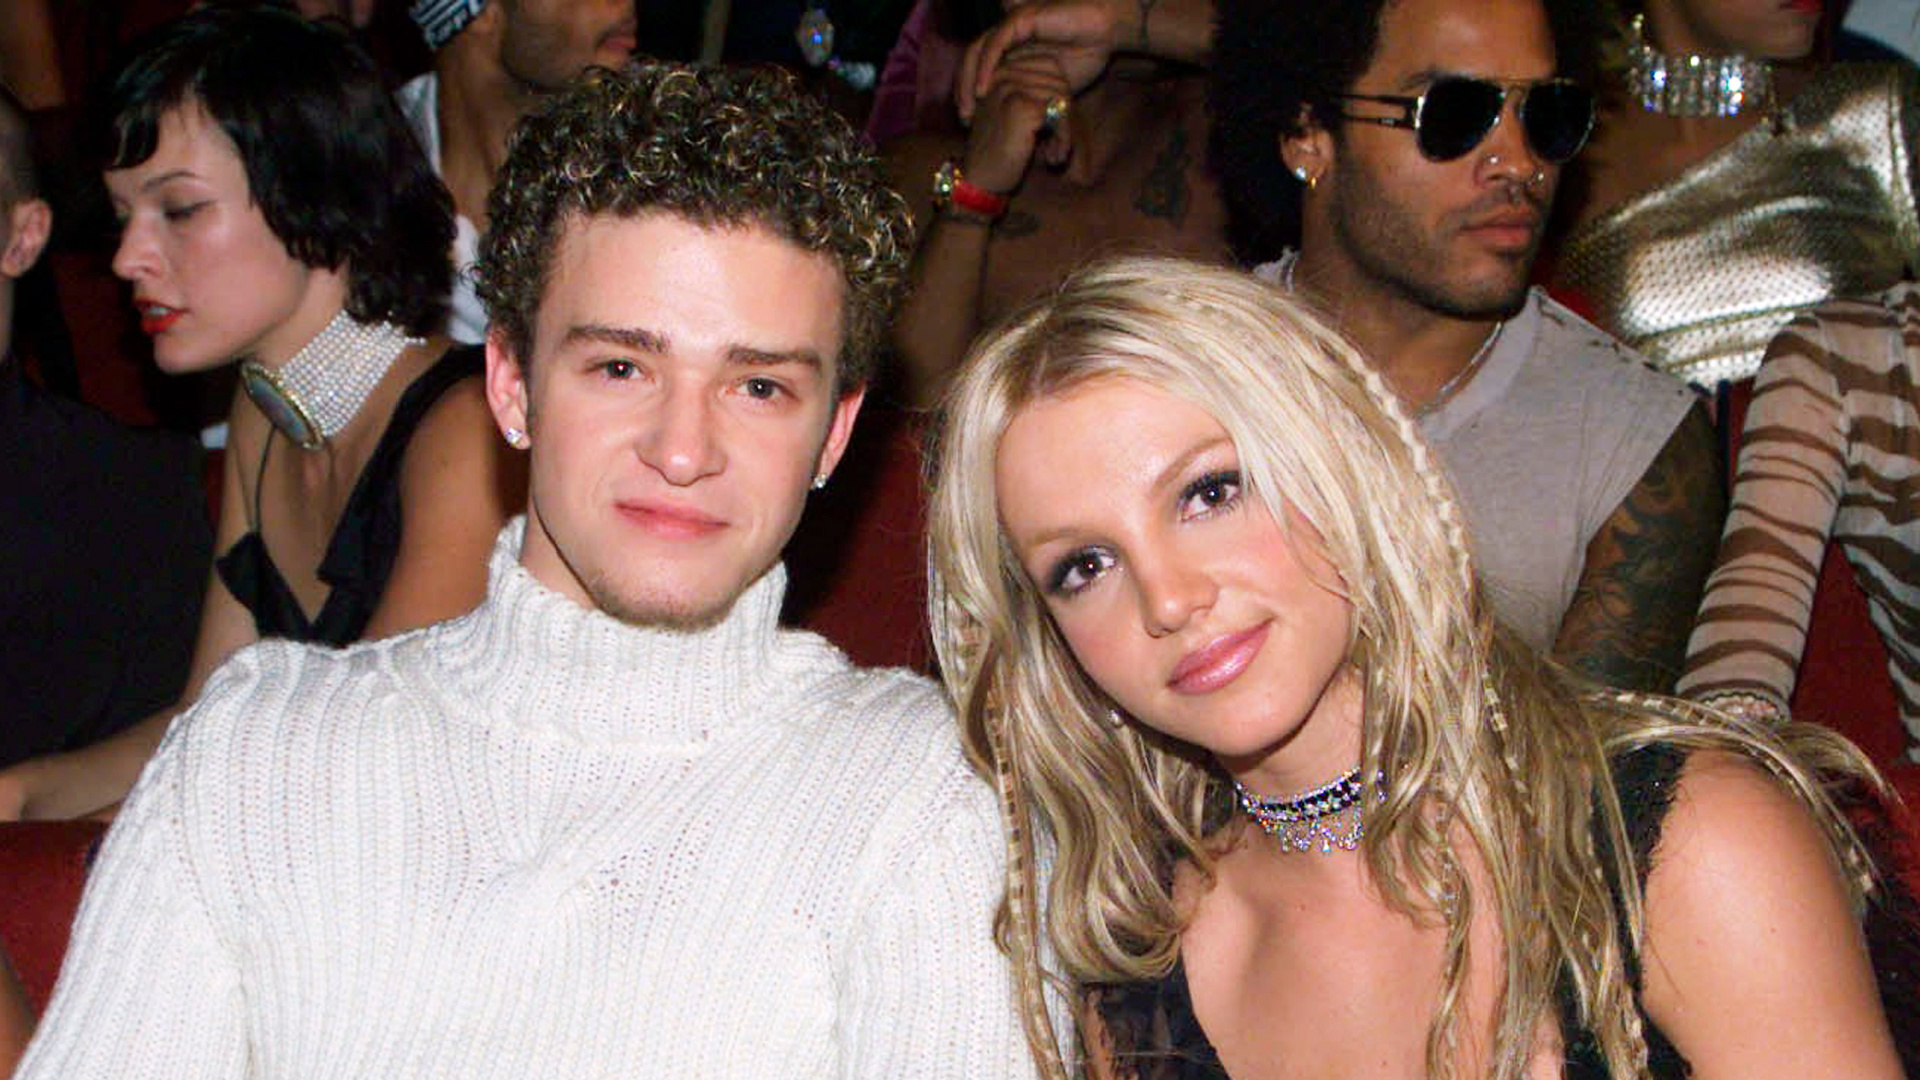 One of Britney's shocking revelations: an abortion with Justin Timberlake